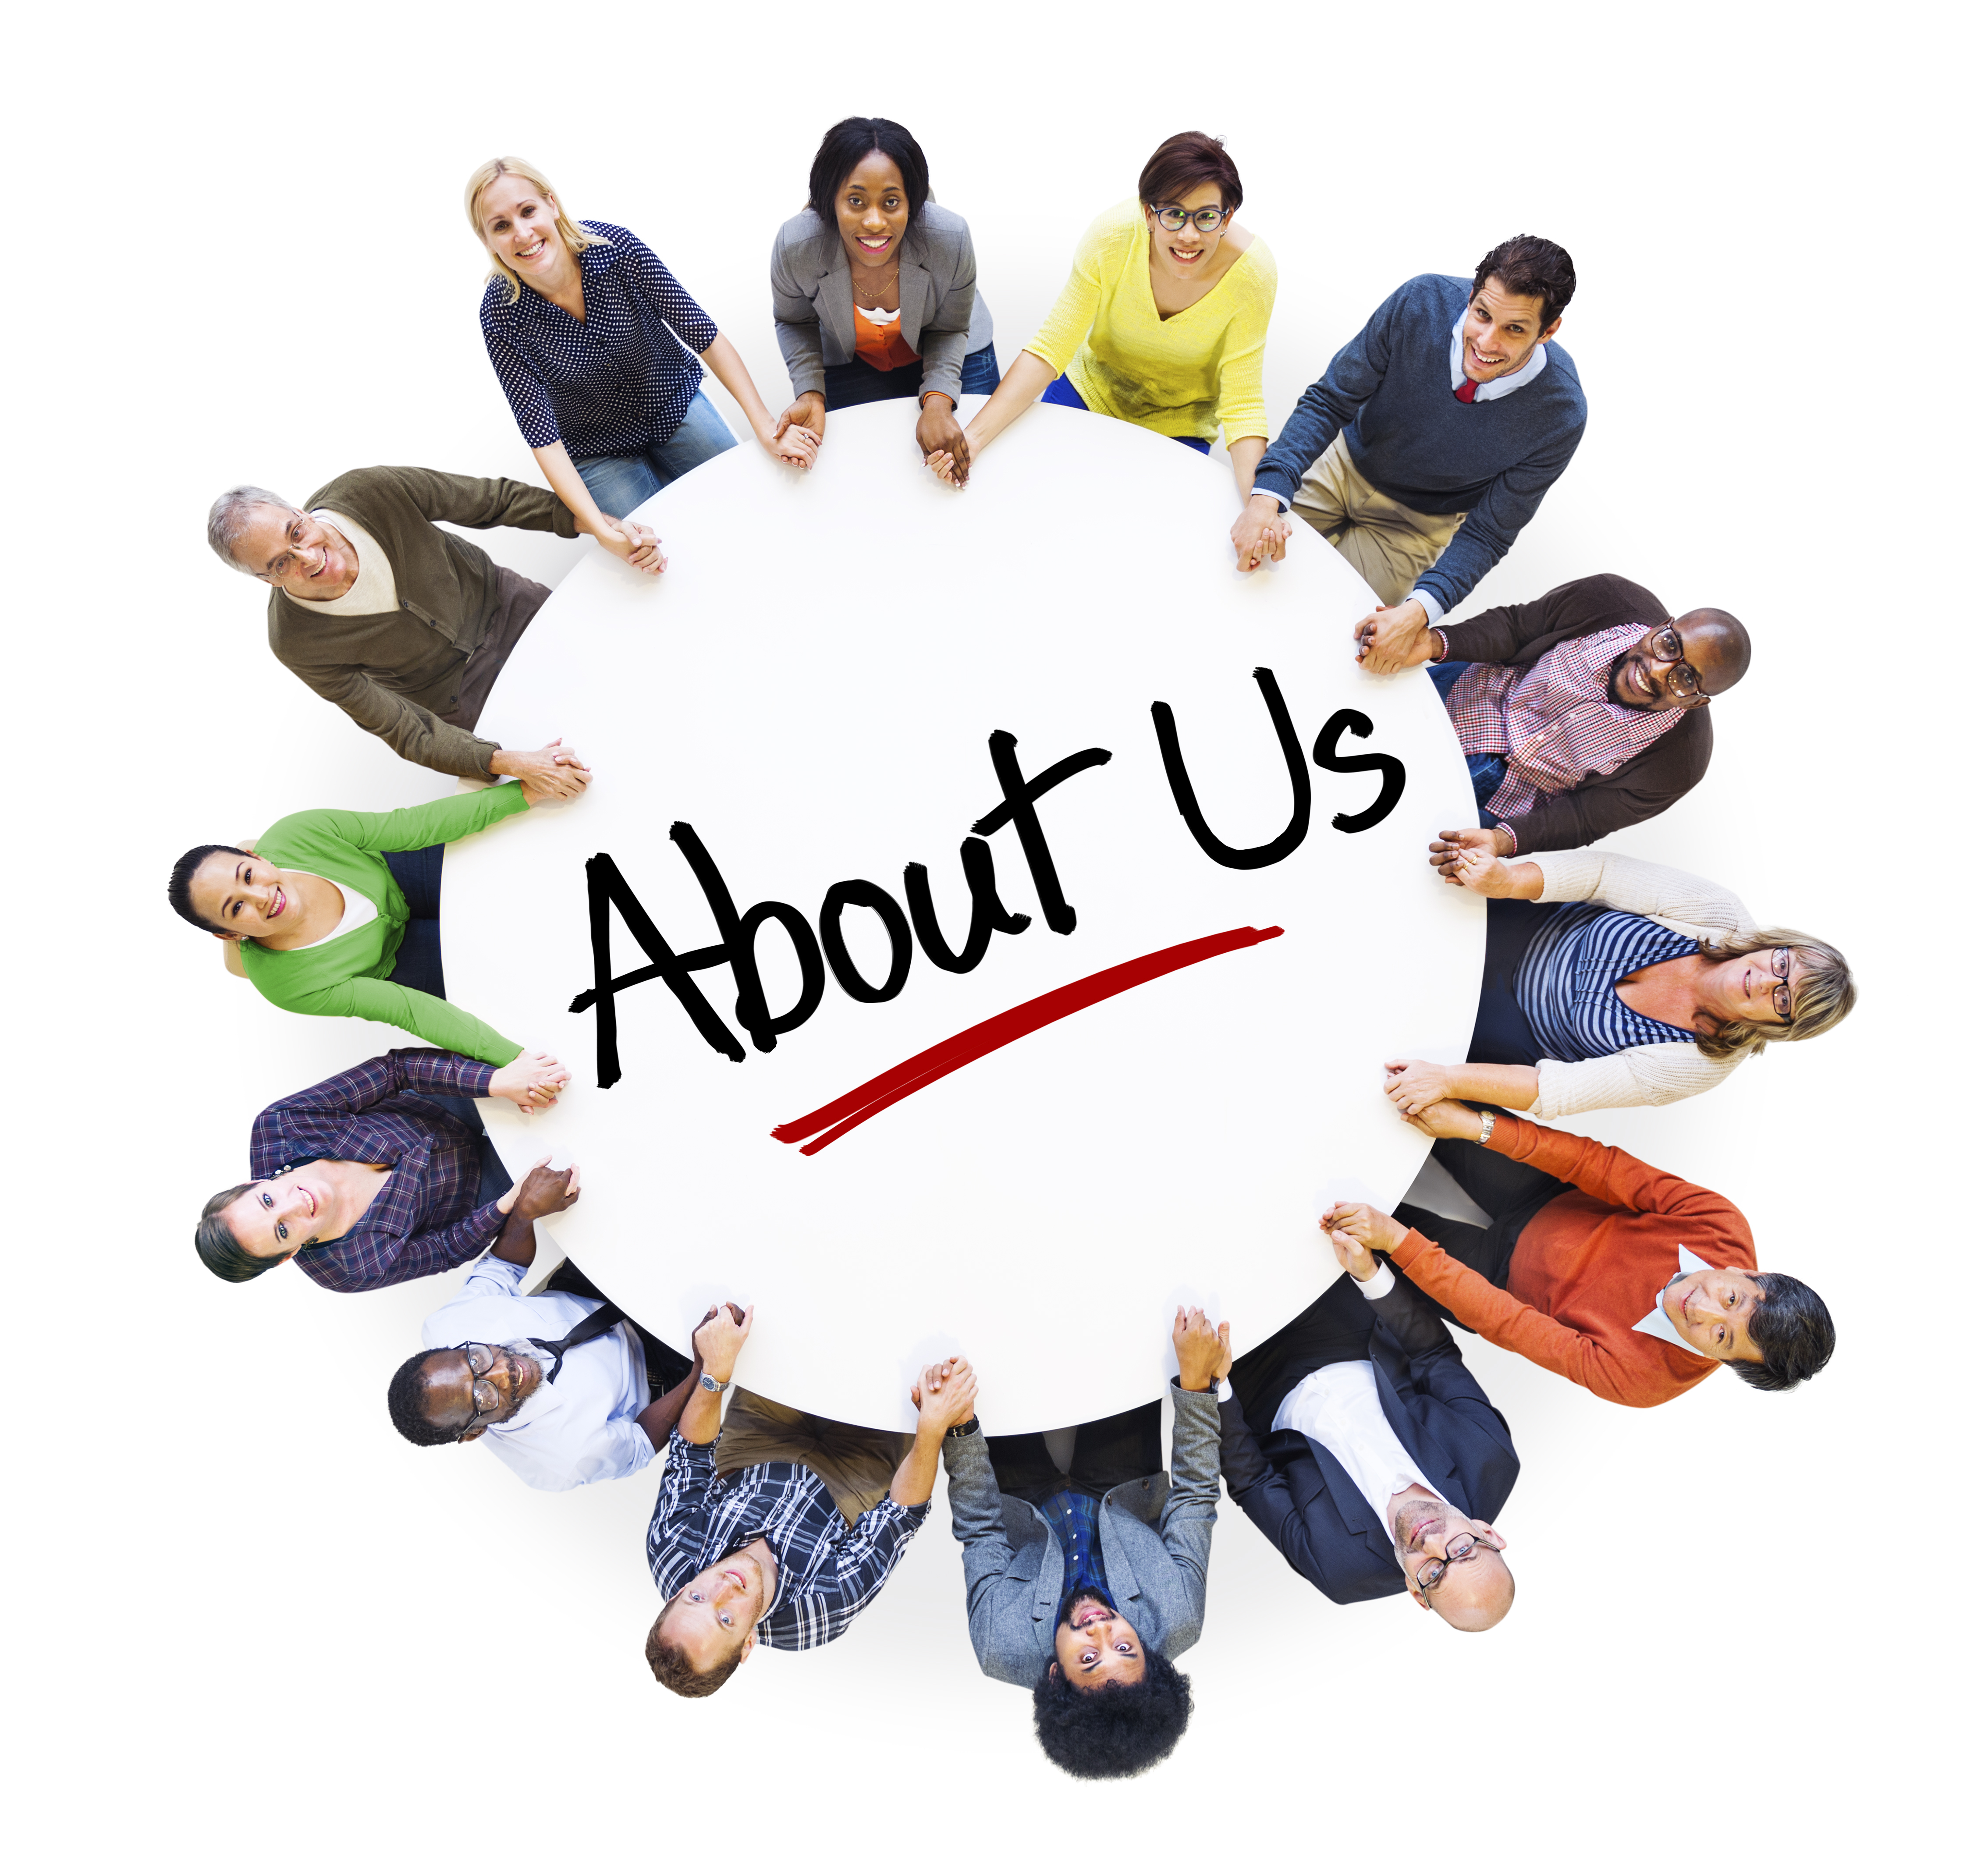 Multiethnic People in Circle with "About Us" Concept